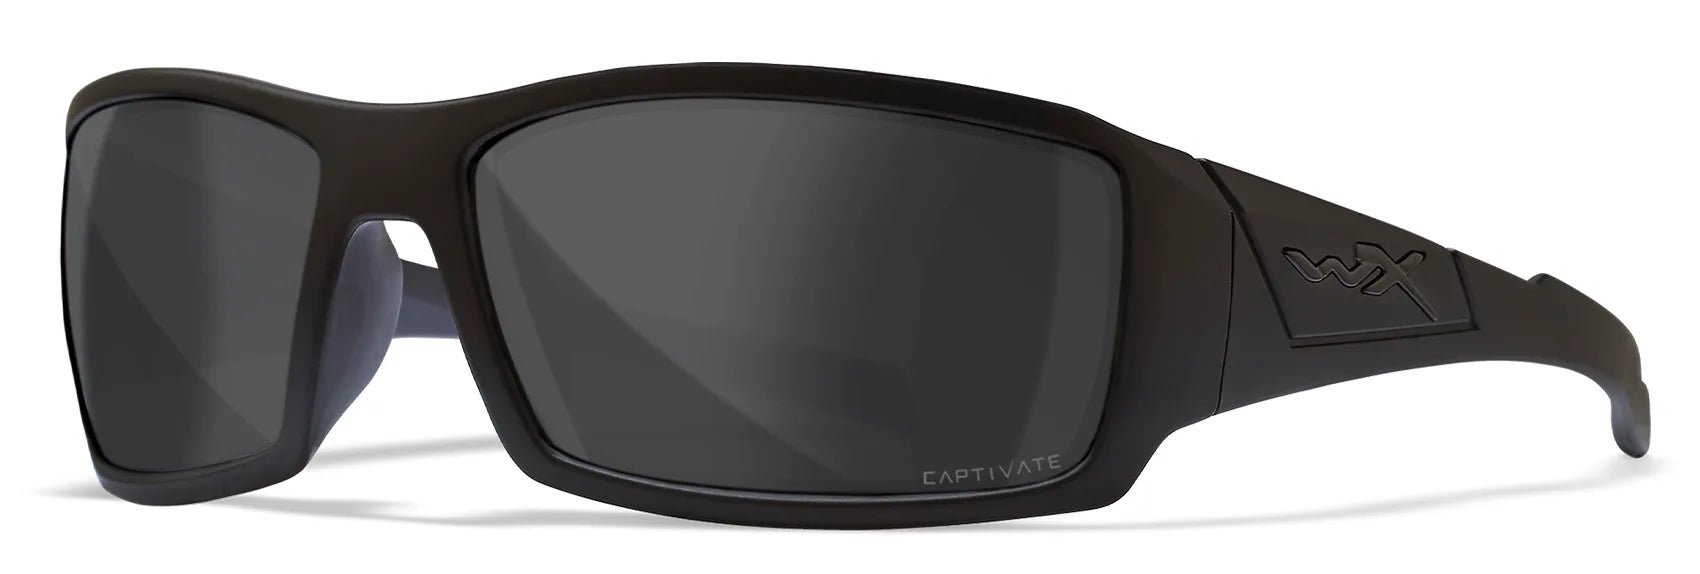 Wiley X Twisted Safety Glasses Matte Black / CAPTIVATE™ Polarized Grey